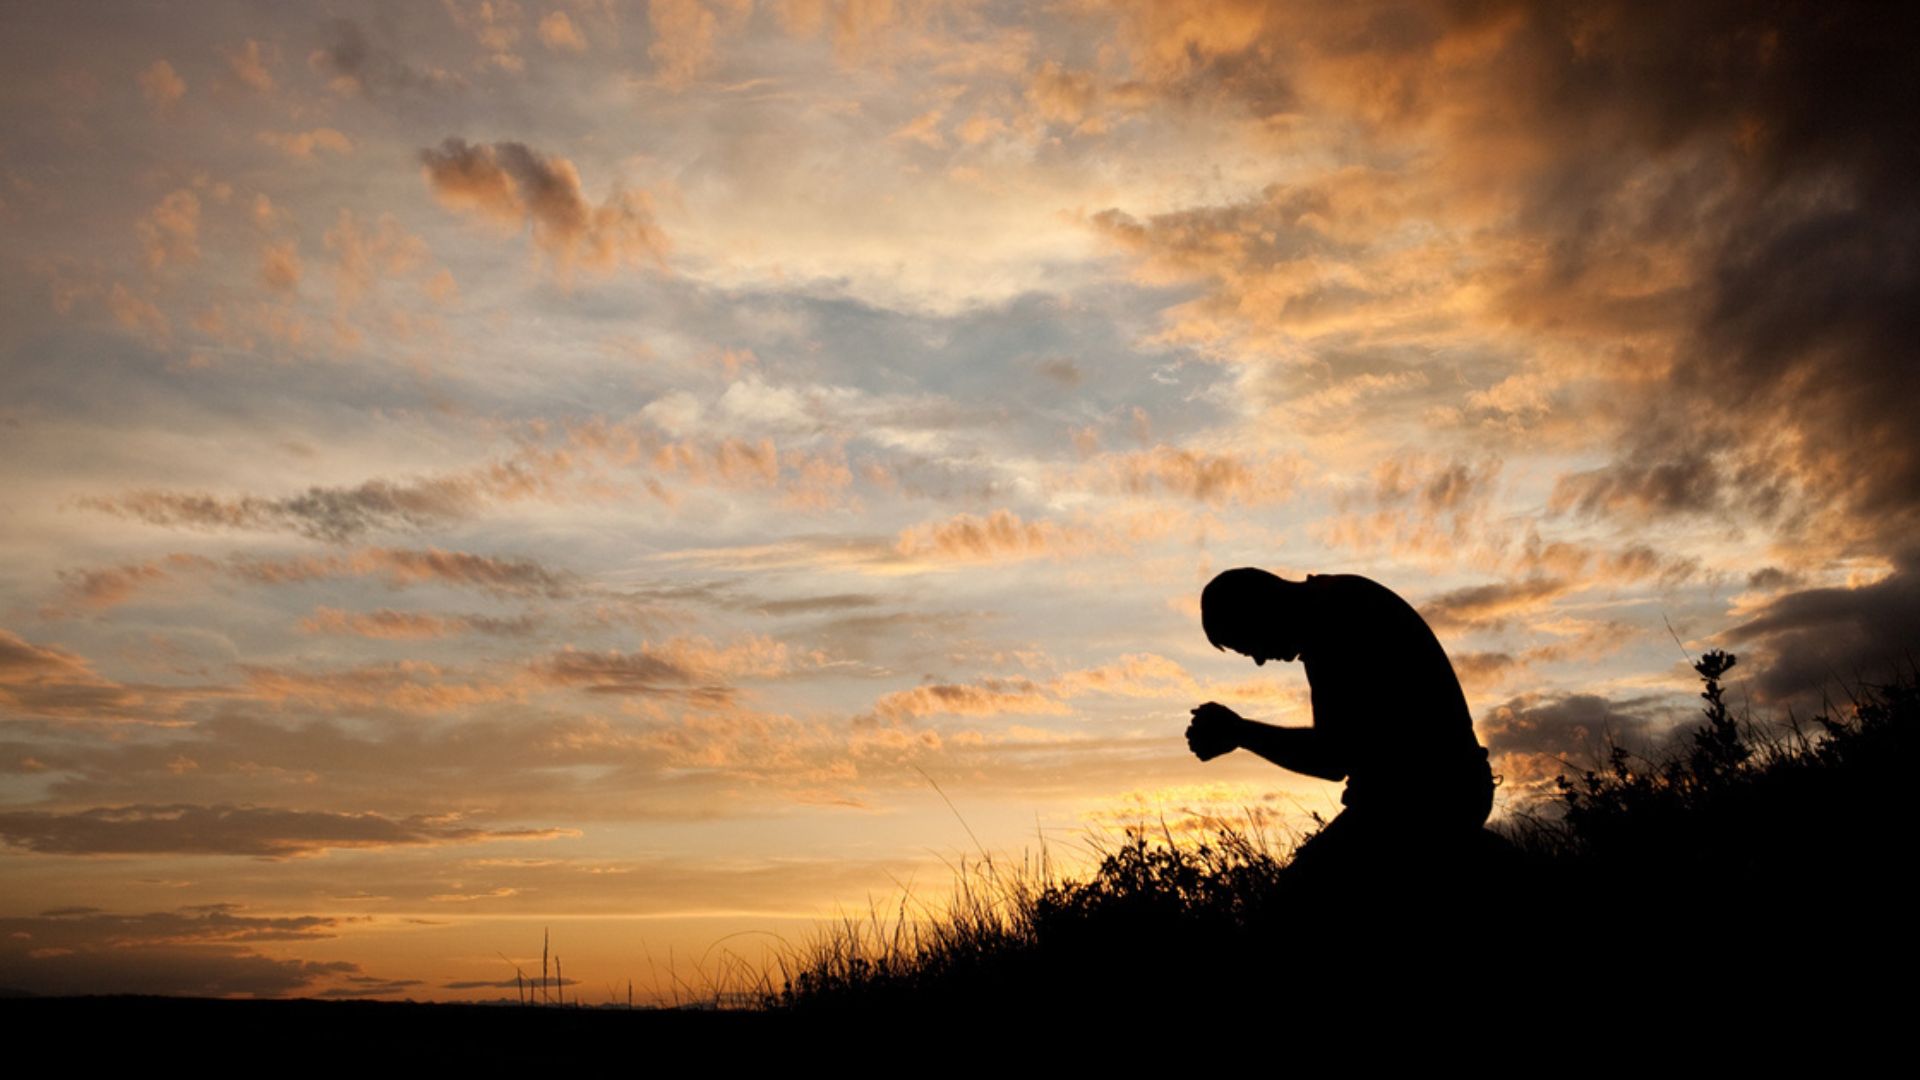 A Man Sitting And Praying On Grass Field